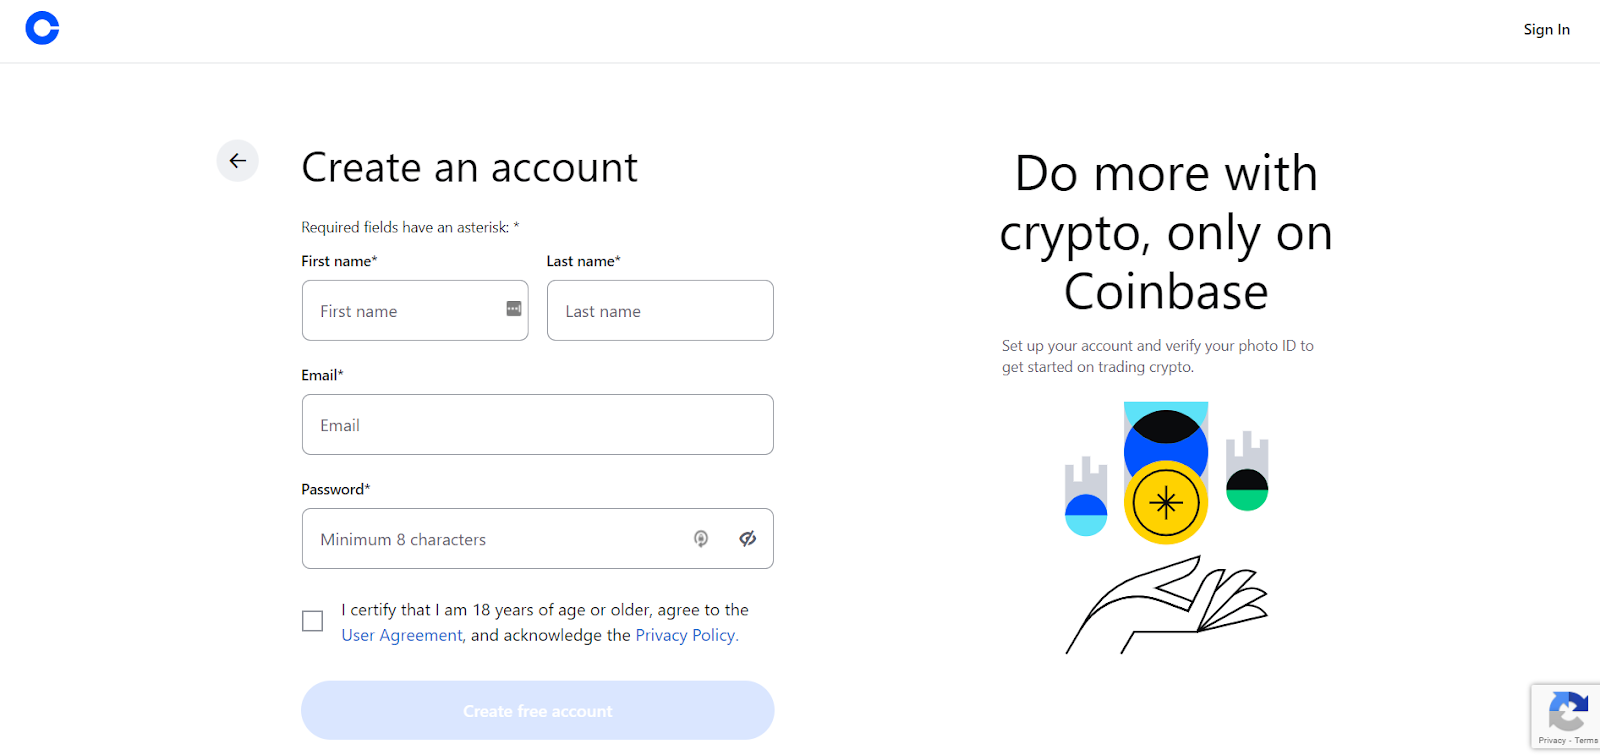 Coinbase step1 sign up